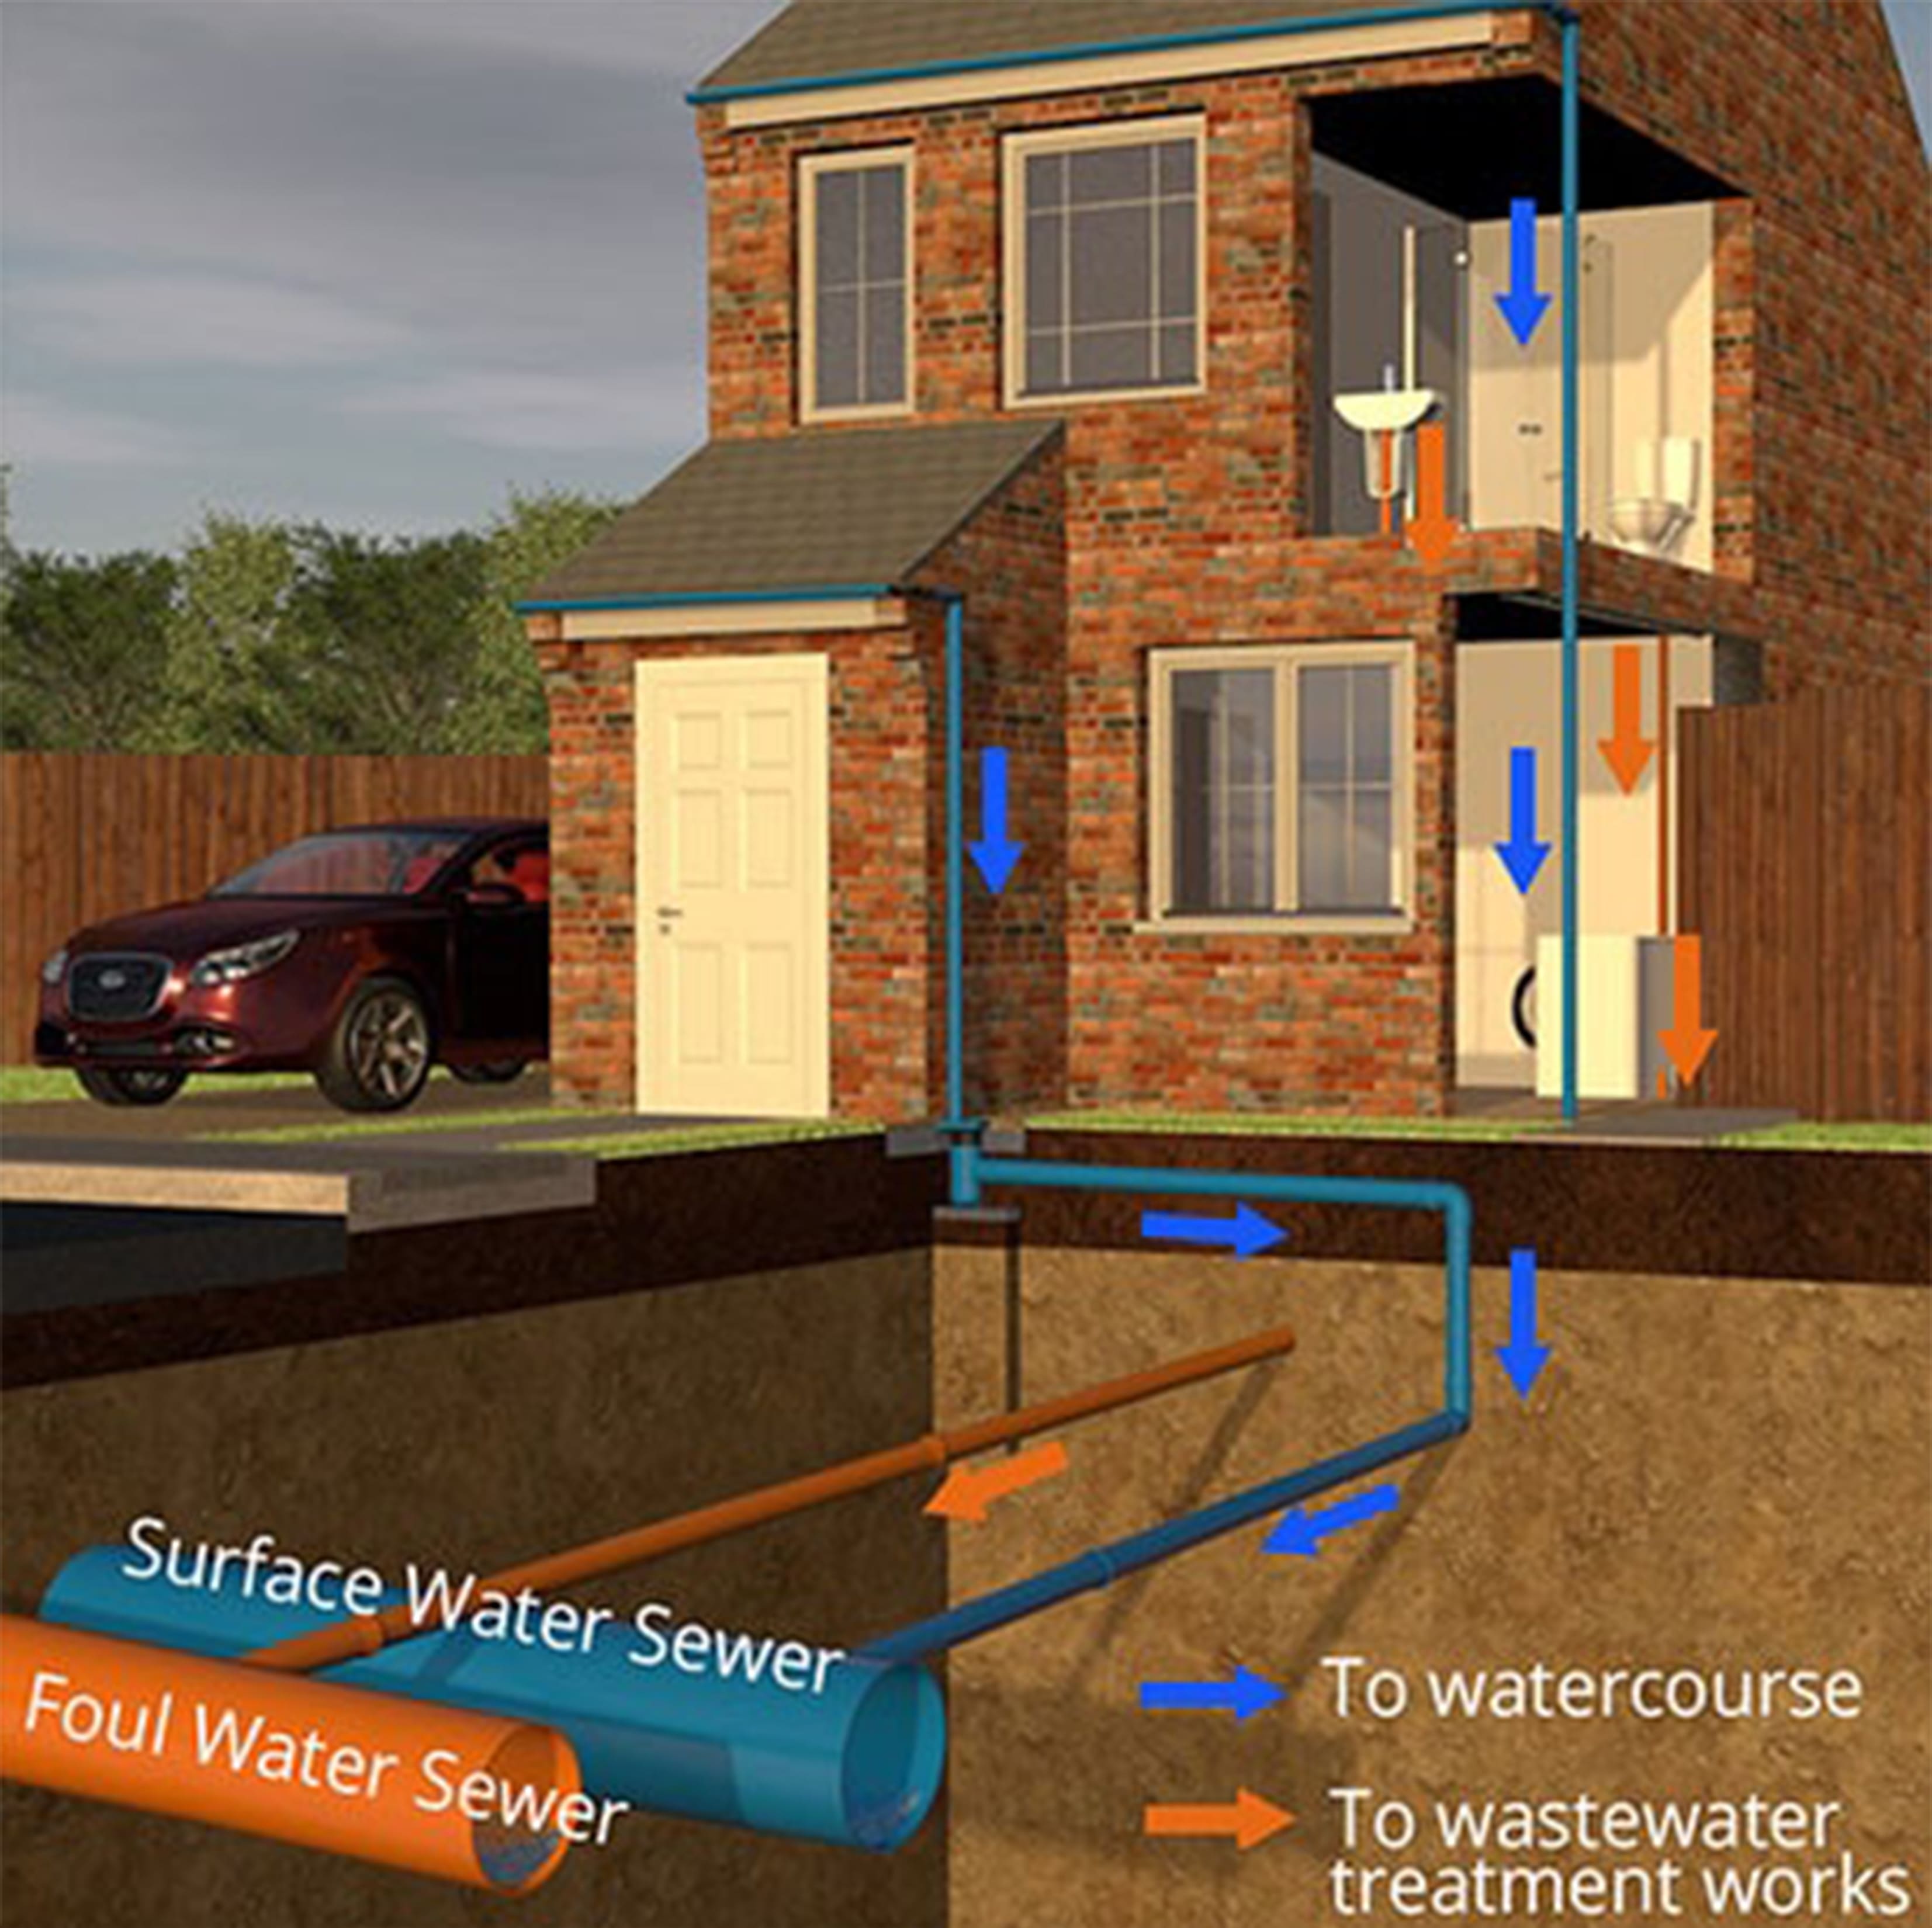 An illustration of a separate drainage system from a house.